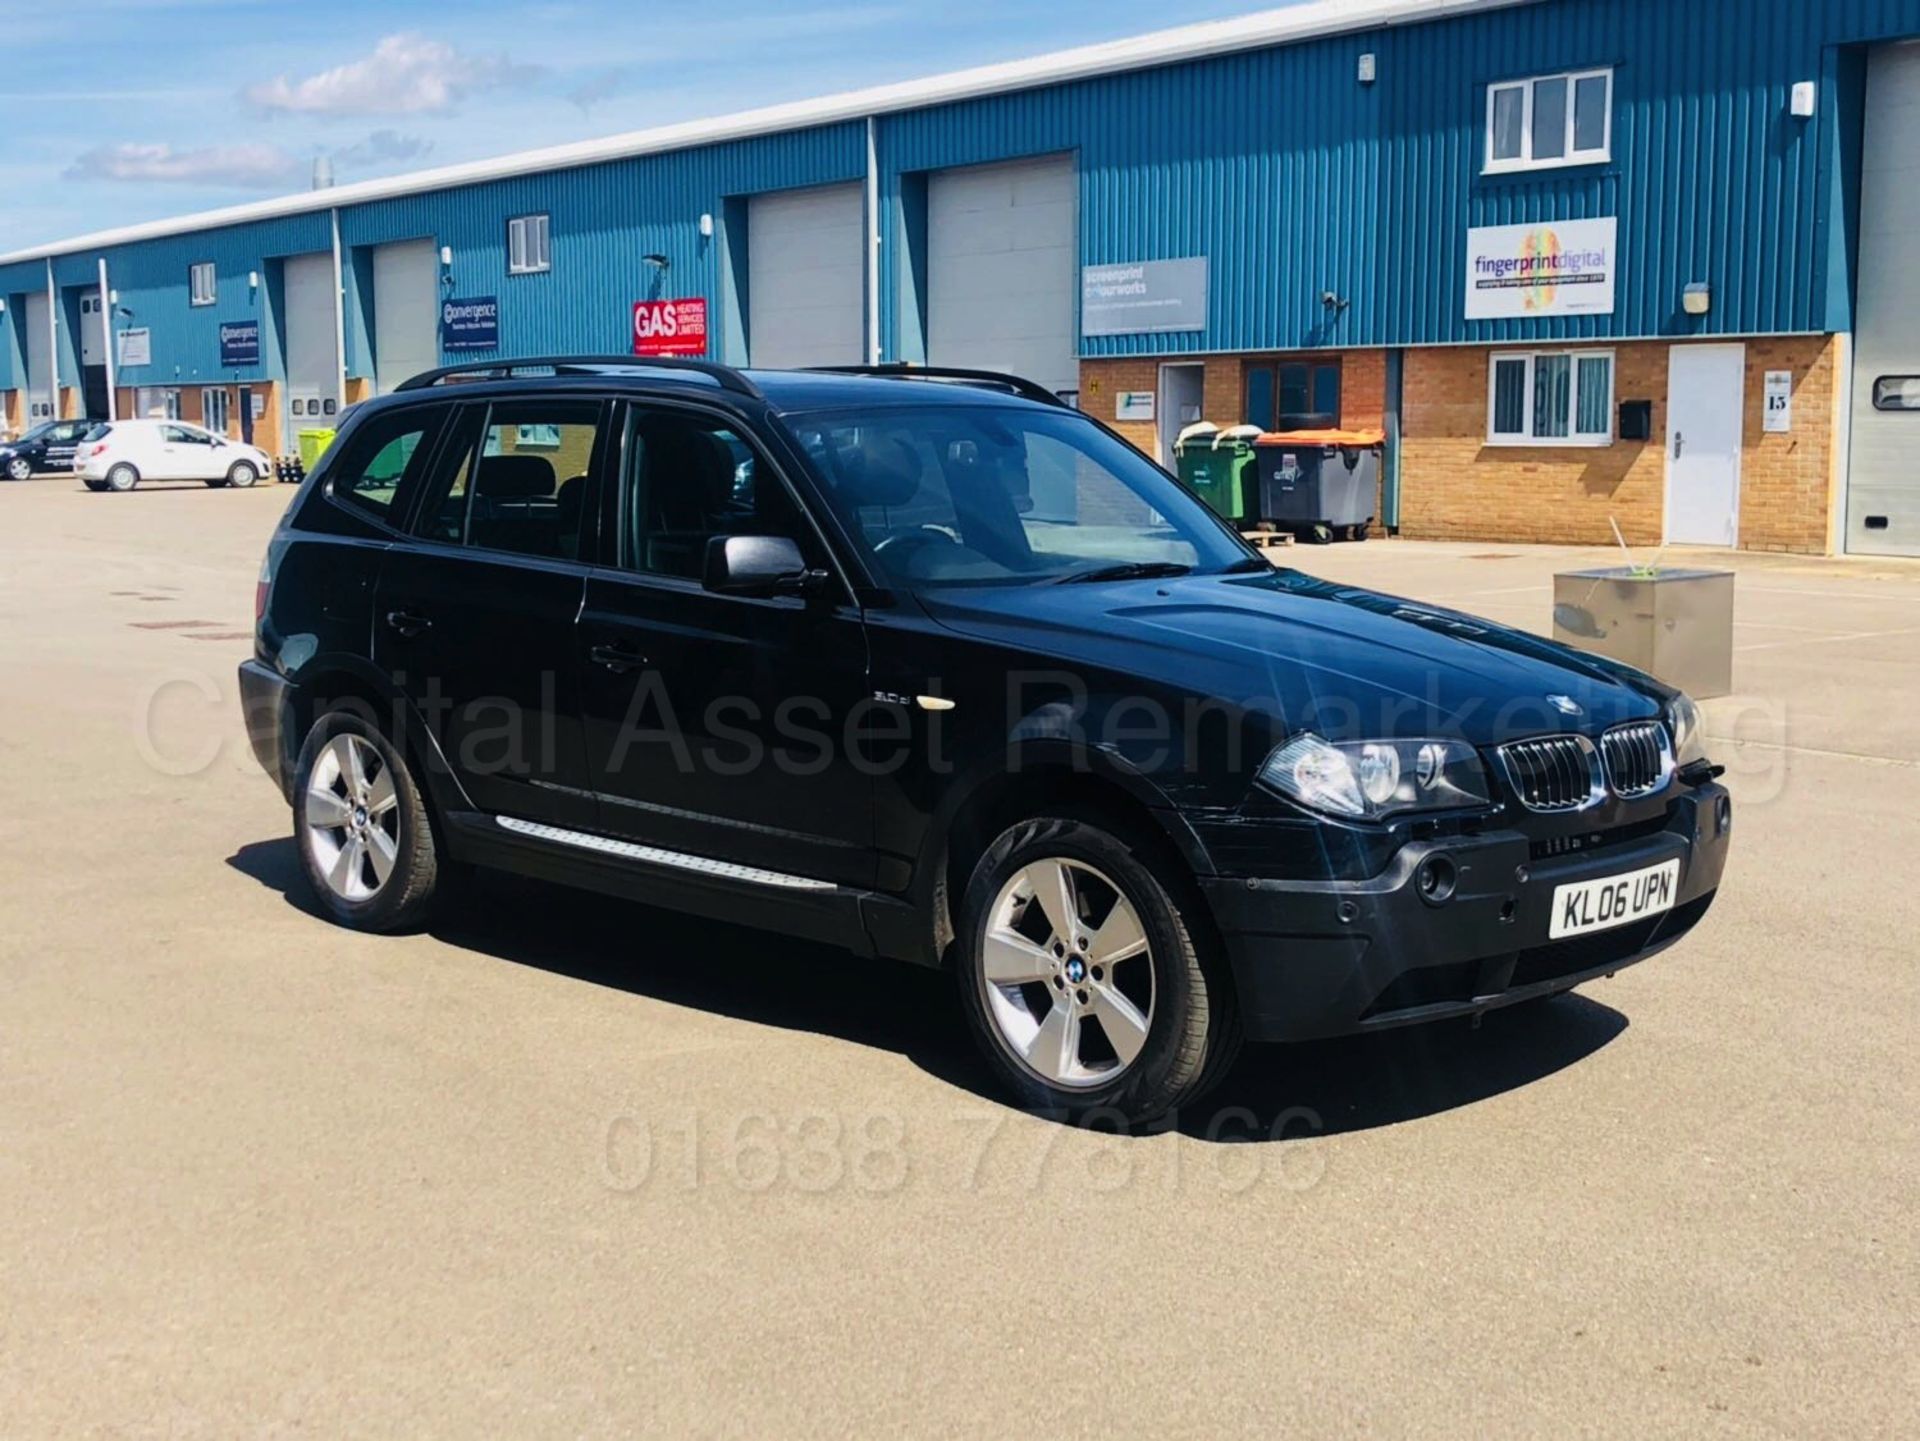 BMW X3 *SPORT EDITION* (2006) '3.0 DIESEL - 218 BHP - AUTOMATIC' *LEATHER / AIR CON* (NO VAT) - Image 2 of 29